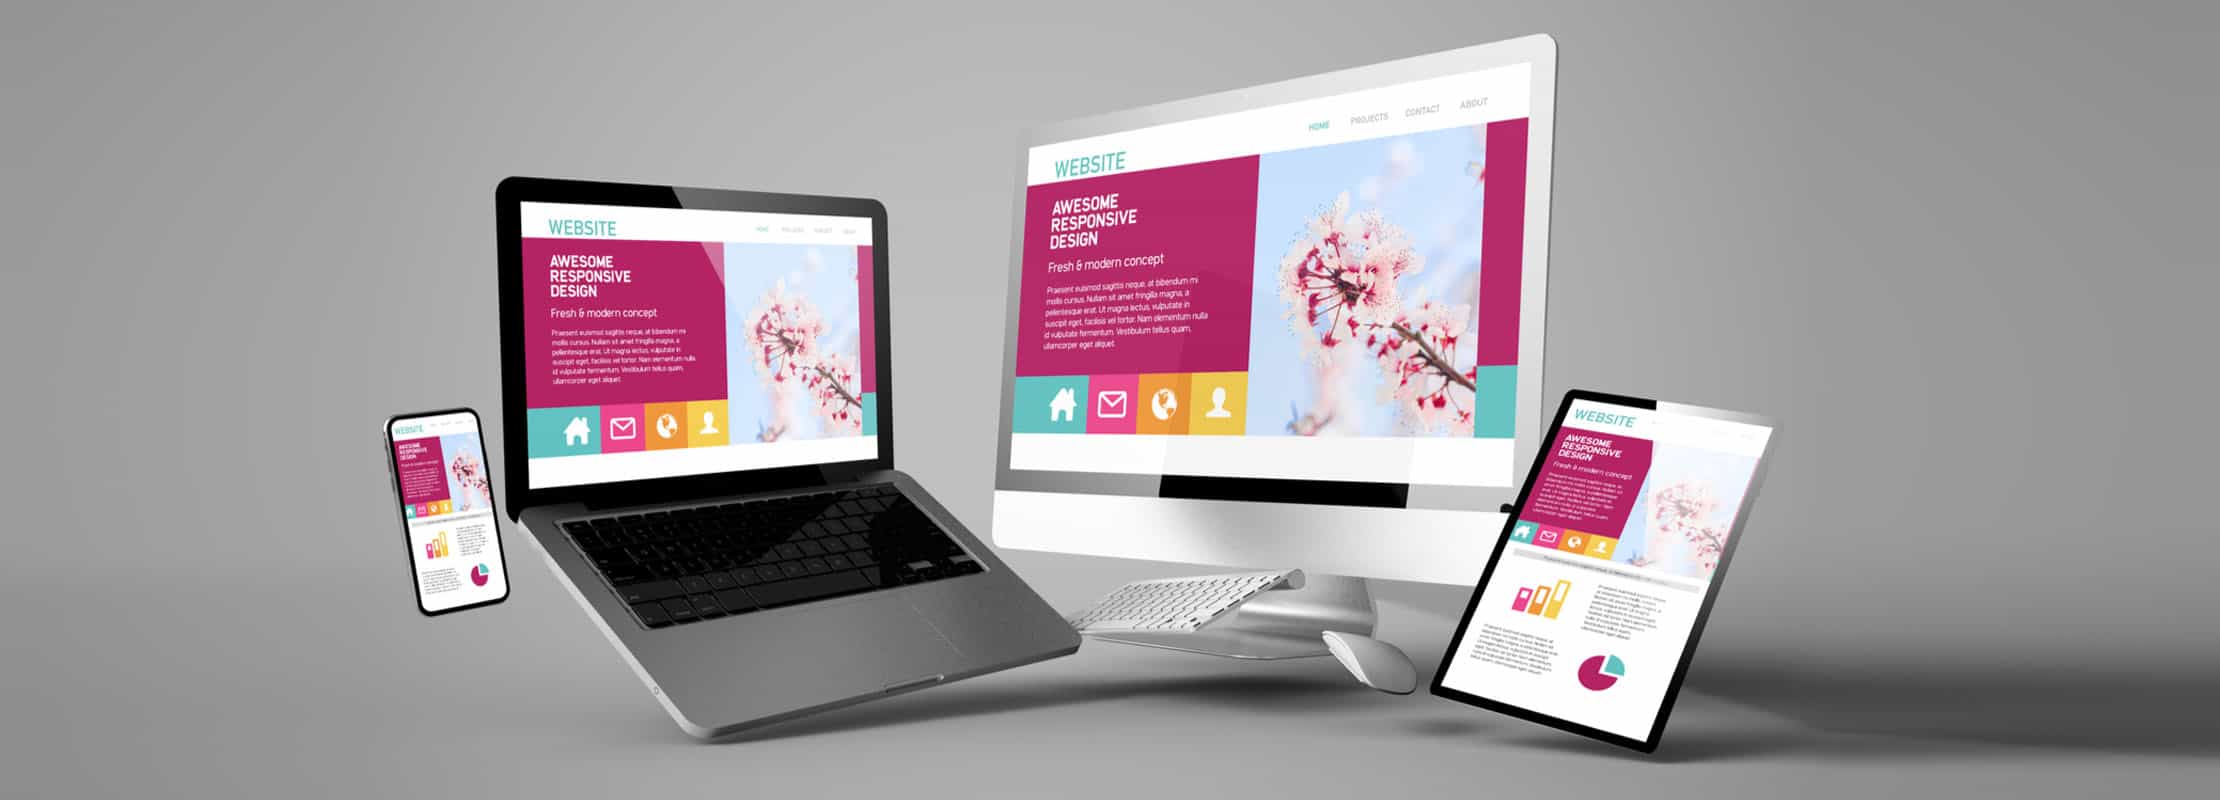 awesome responsive design-a web page is opened in tab,phone,laptop and desktop|web design company in kerala